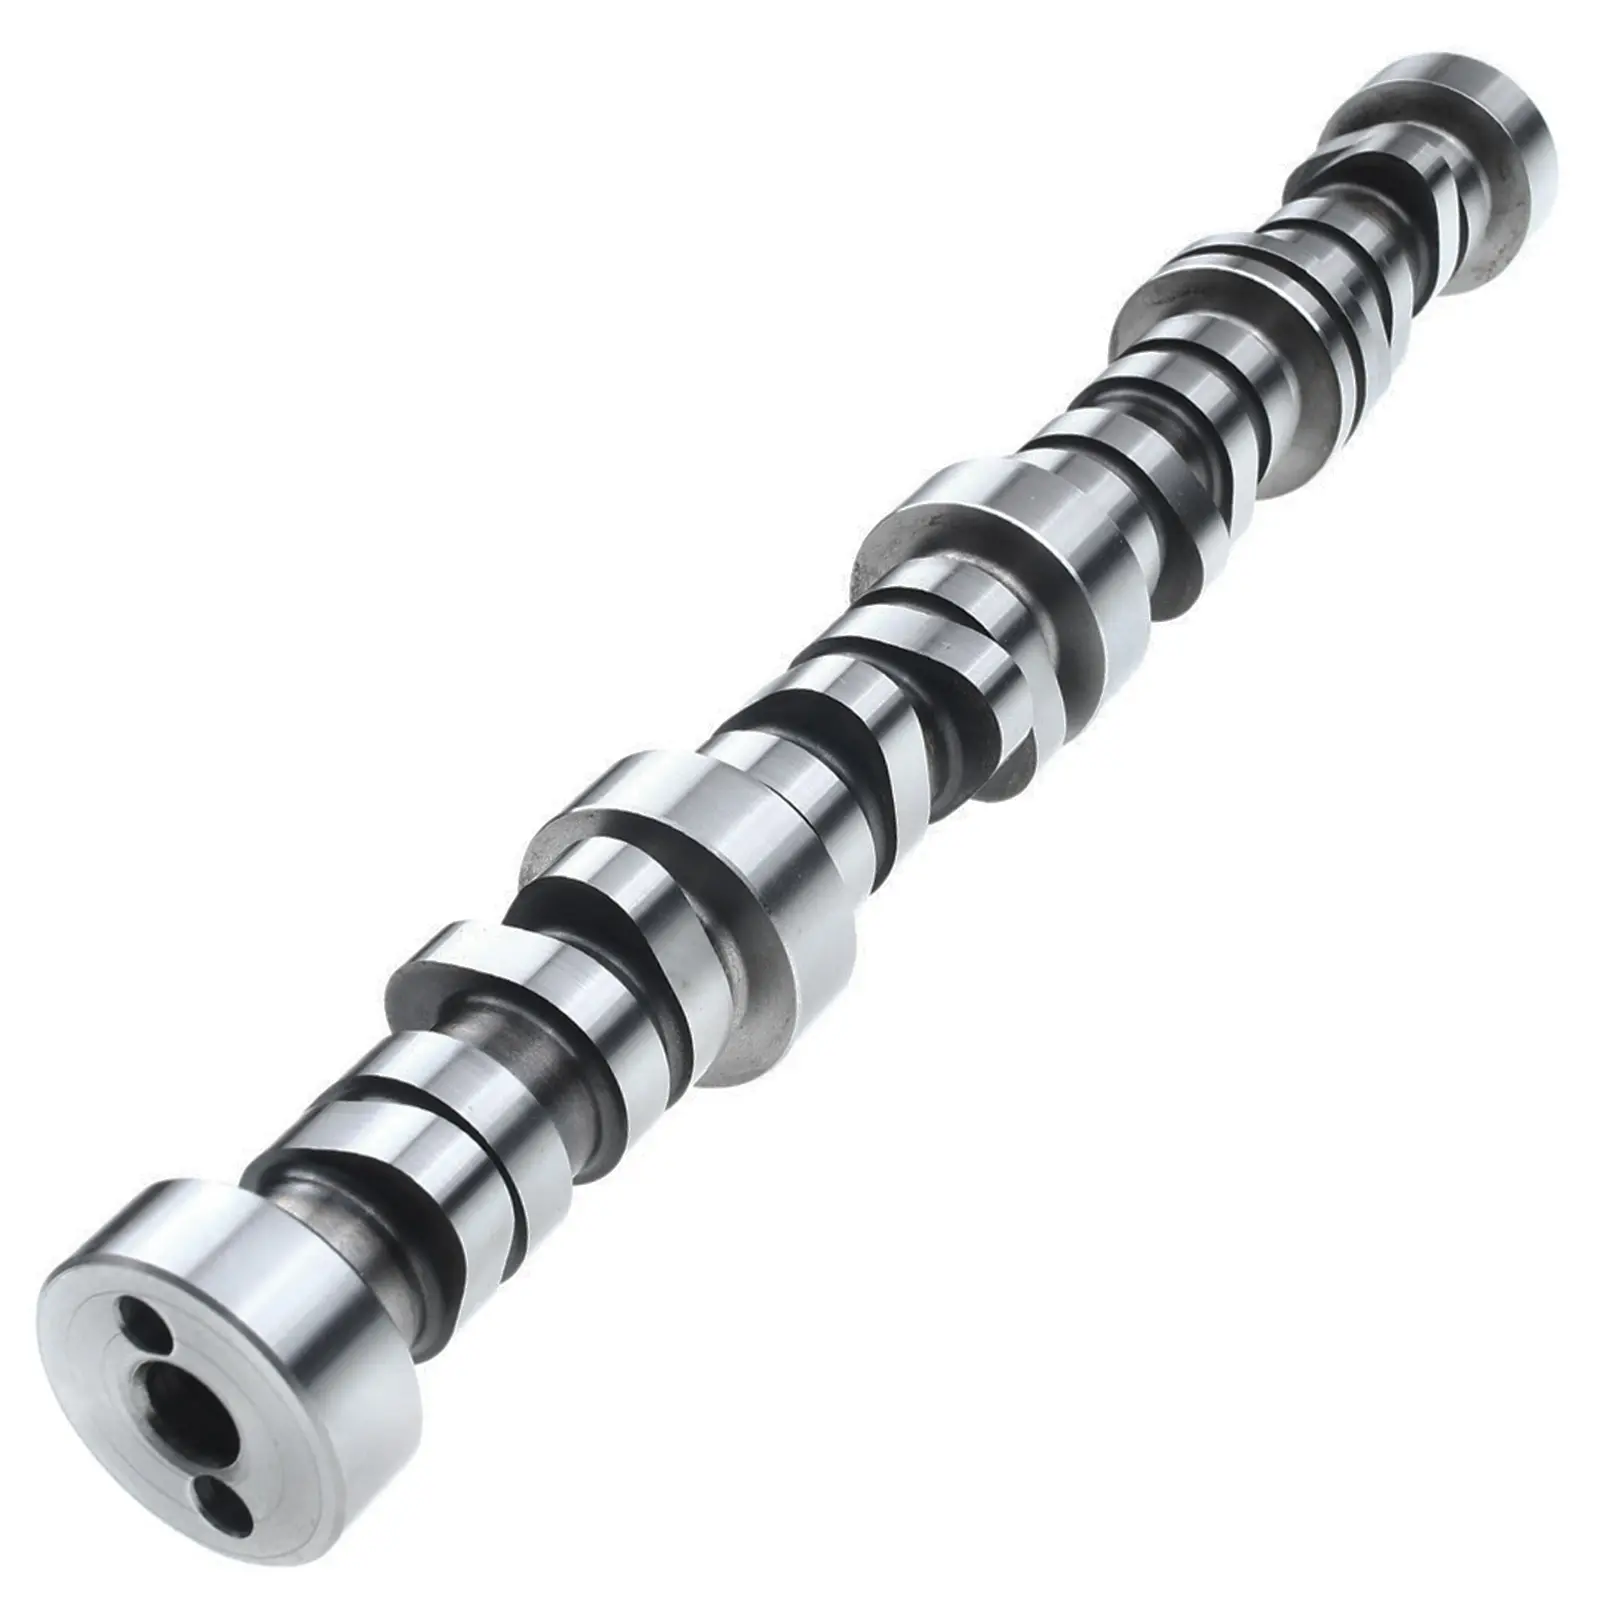 The Camshaft China Trade,Buy China Direct From The Camshaft 